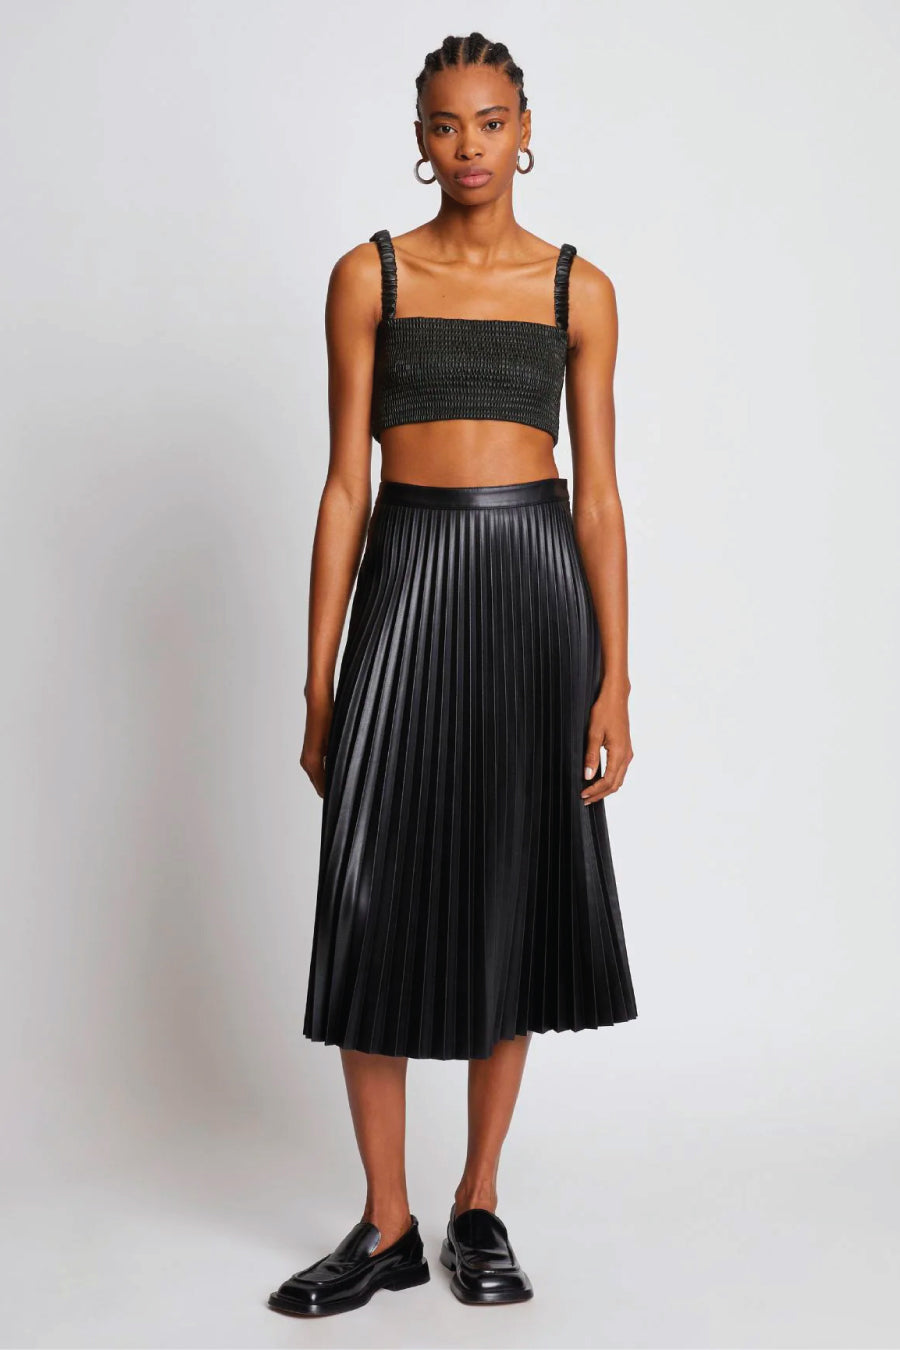 Proenza Schouler White Label Faux Leather Smocked Top - Black